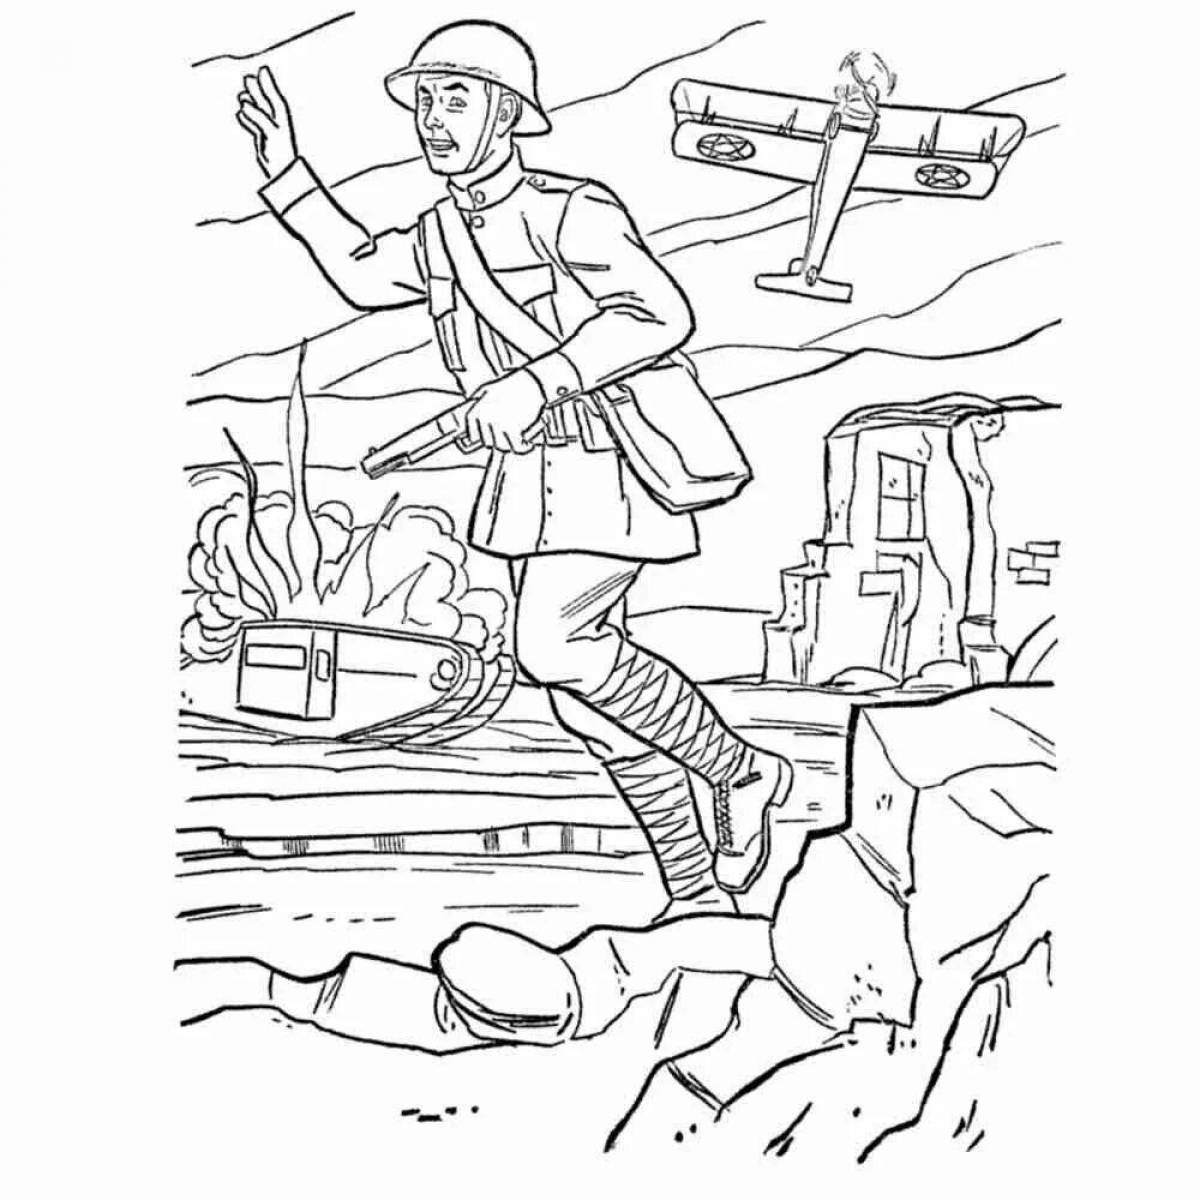 Amazing Russian soldier coloring pages for kids